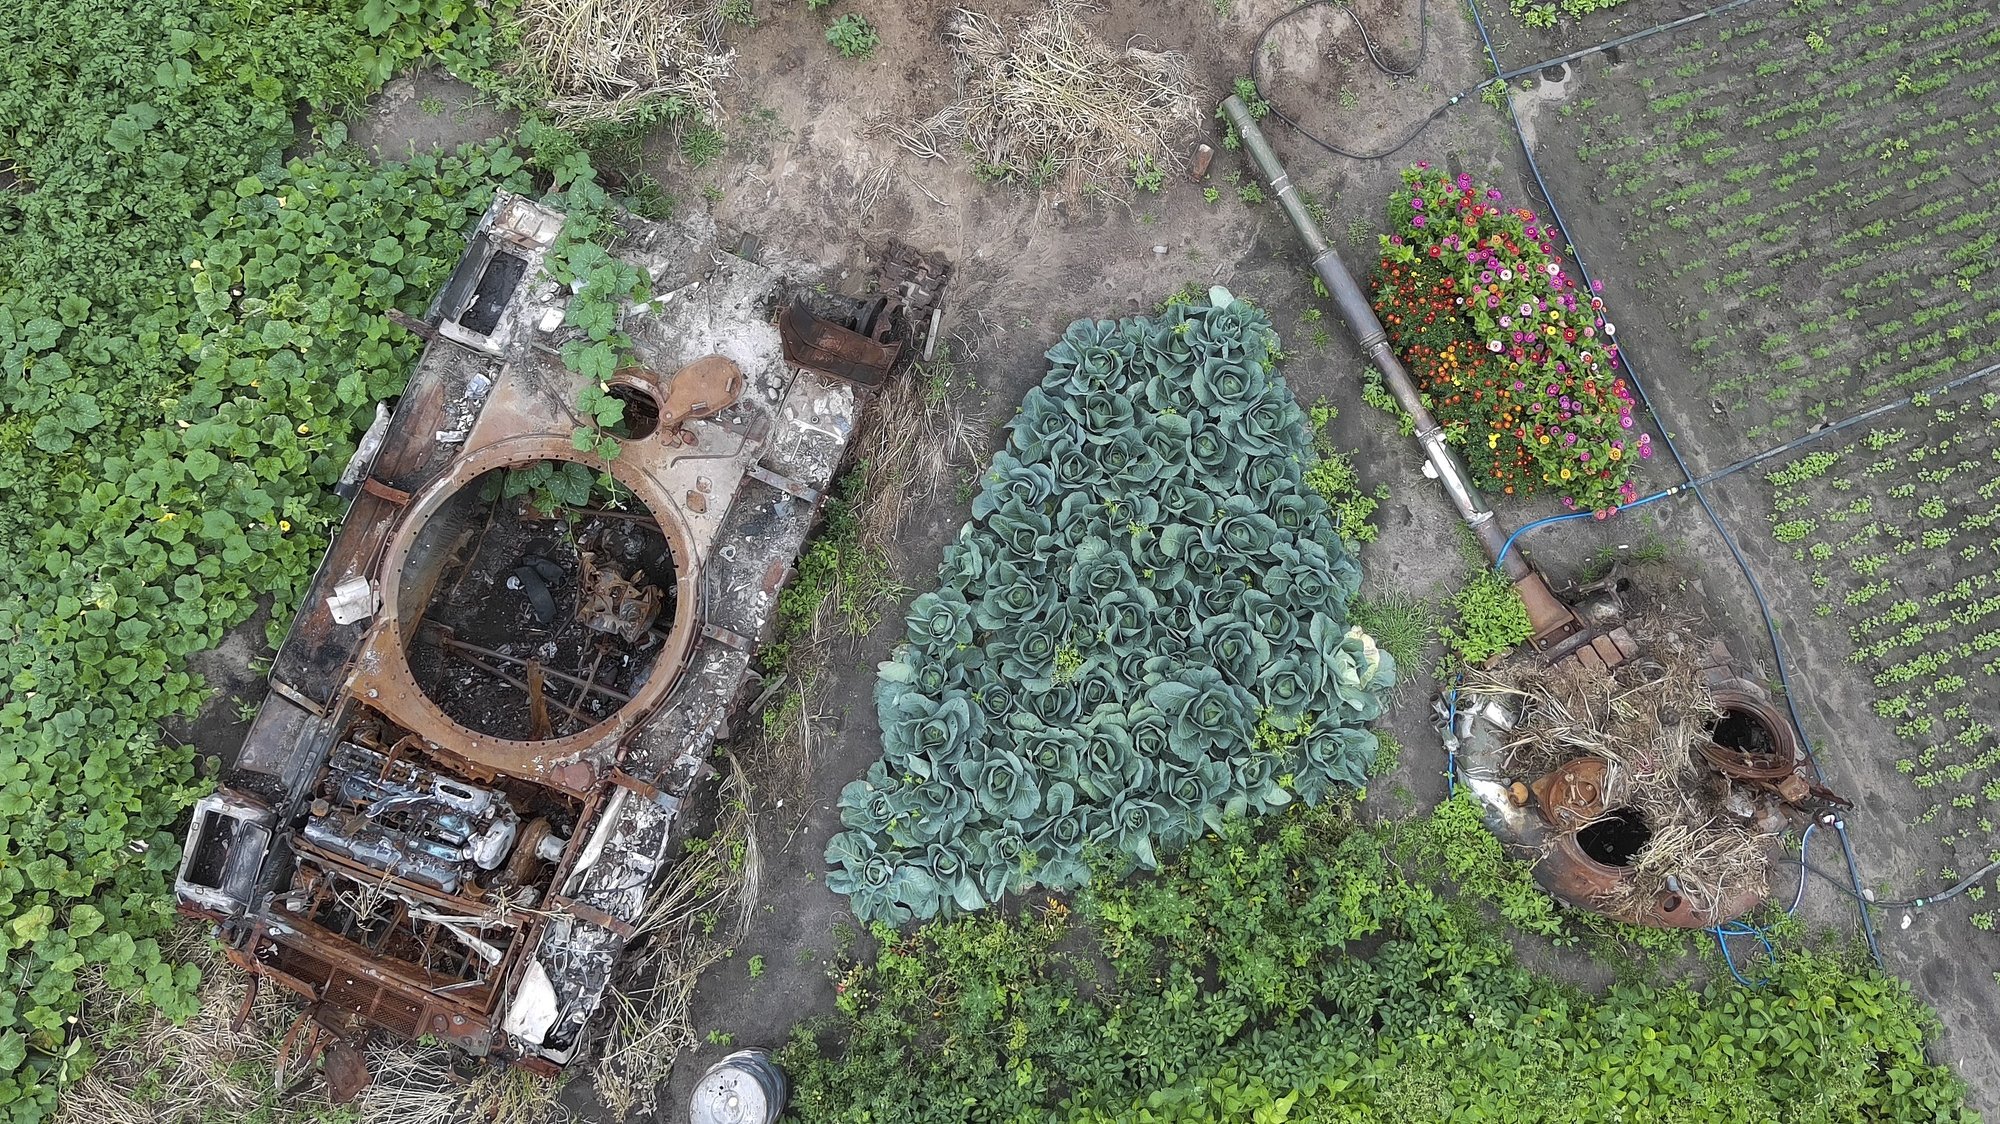 epaselect epa10105676 An aerial photo made from a drone shows vegetables grow around of the debris of a Russian tank at a garden in the village of Velyka Dymerka, Kyiv area, Ukraine, 04 August 2022. The wreckage of the tank remained in the garden after Russian troops were pushed out from the Kyiv region and locals planted flowers and vegetables between its debris. Velyka Dymerka as well as other towns and villages in the northern part of the Kyiv region, became battlefields, heavily shelled, causing death and damage when Russian troops tried to reach the Ukrainian capital of Kyiv in February and March 2022.  EPA/SERGEY DOLZHENKO